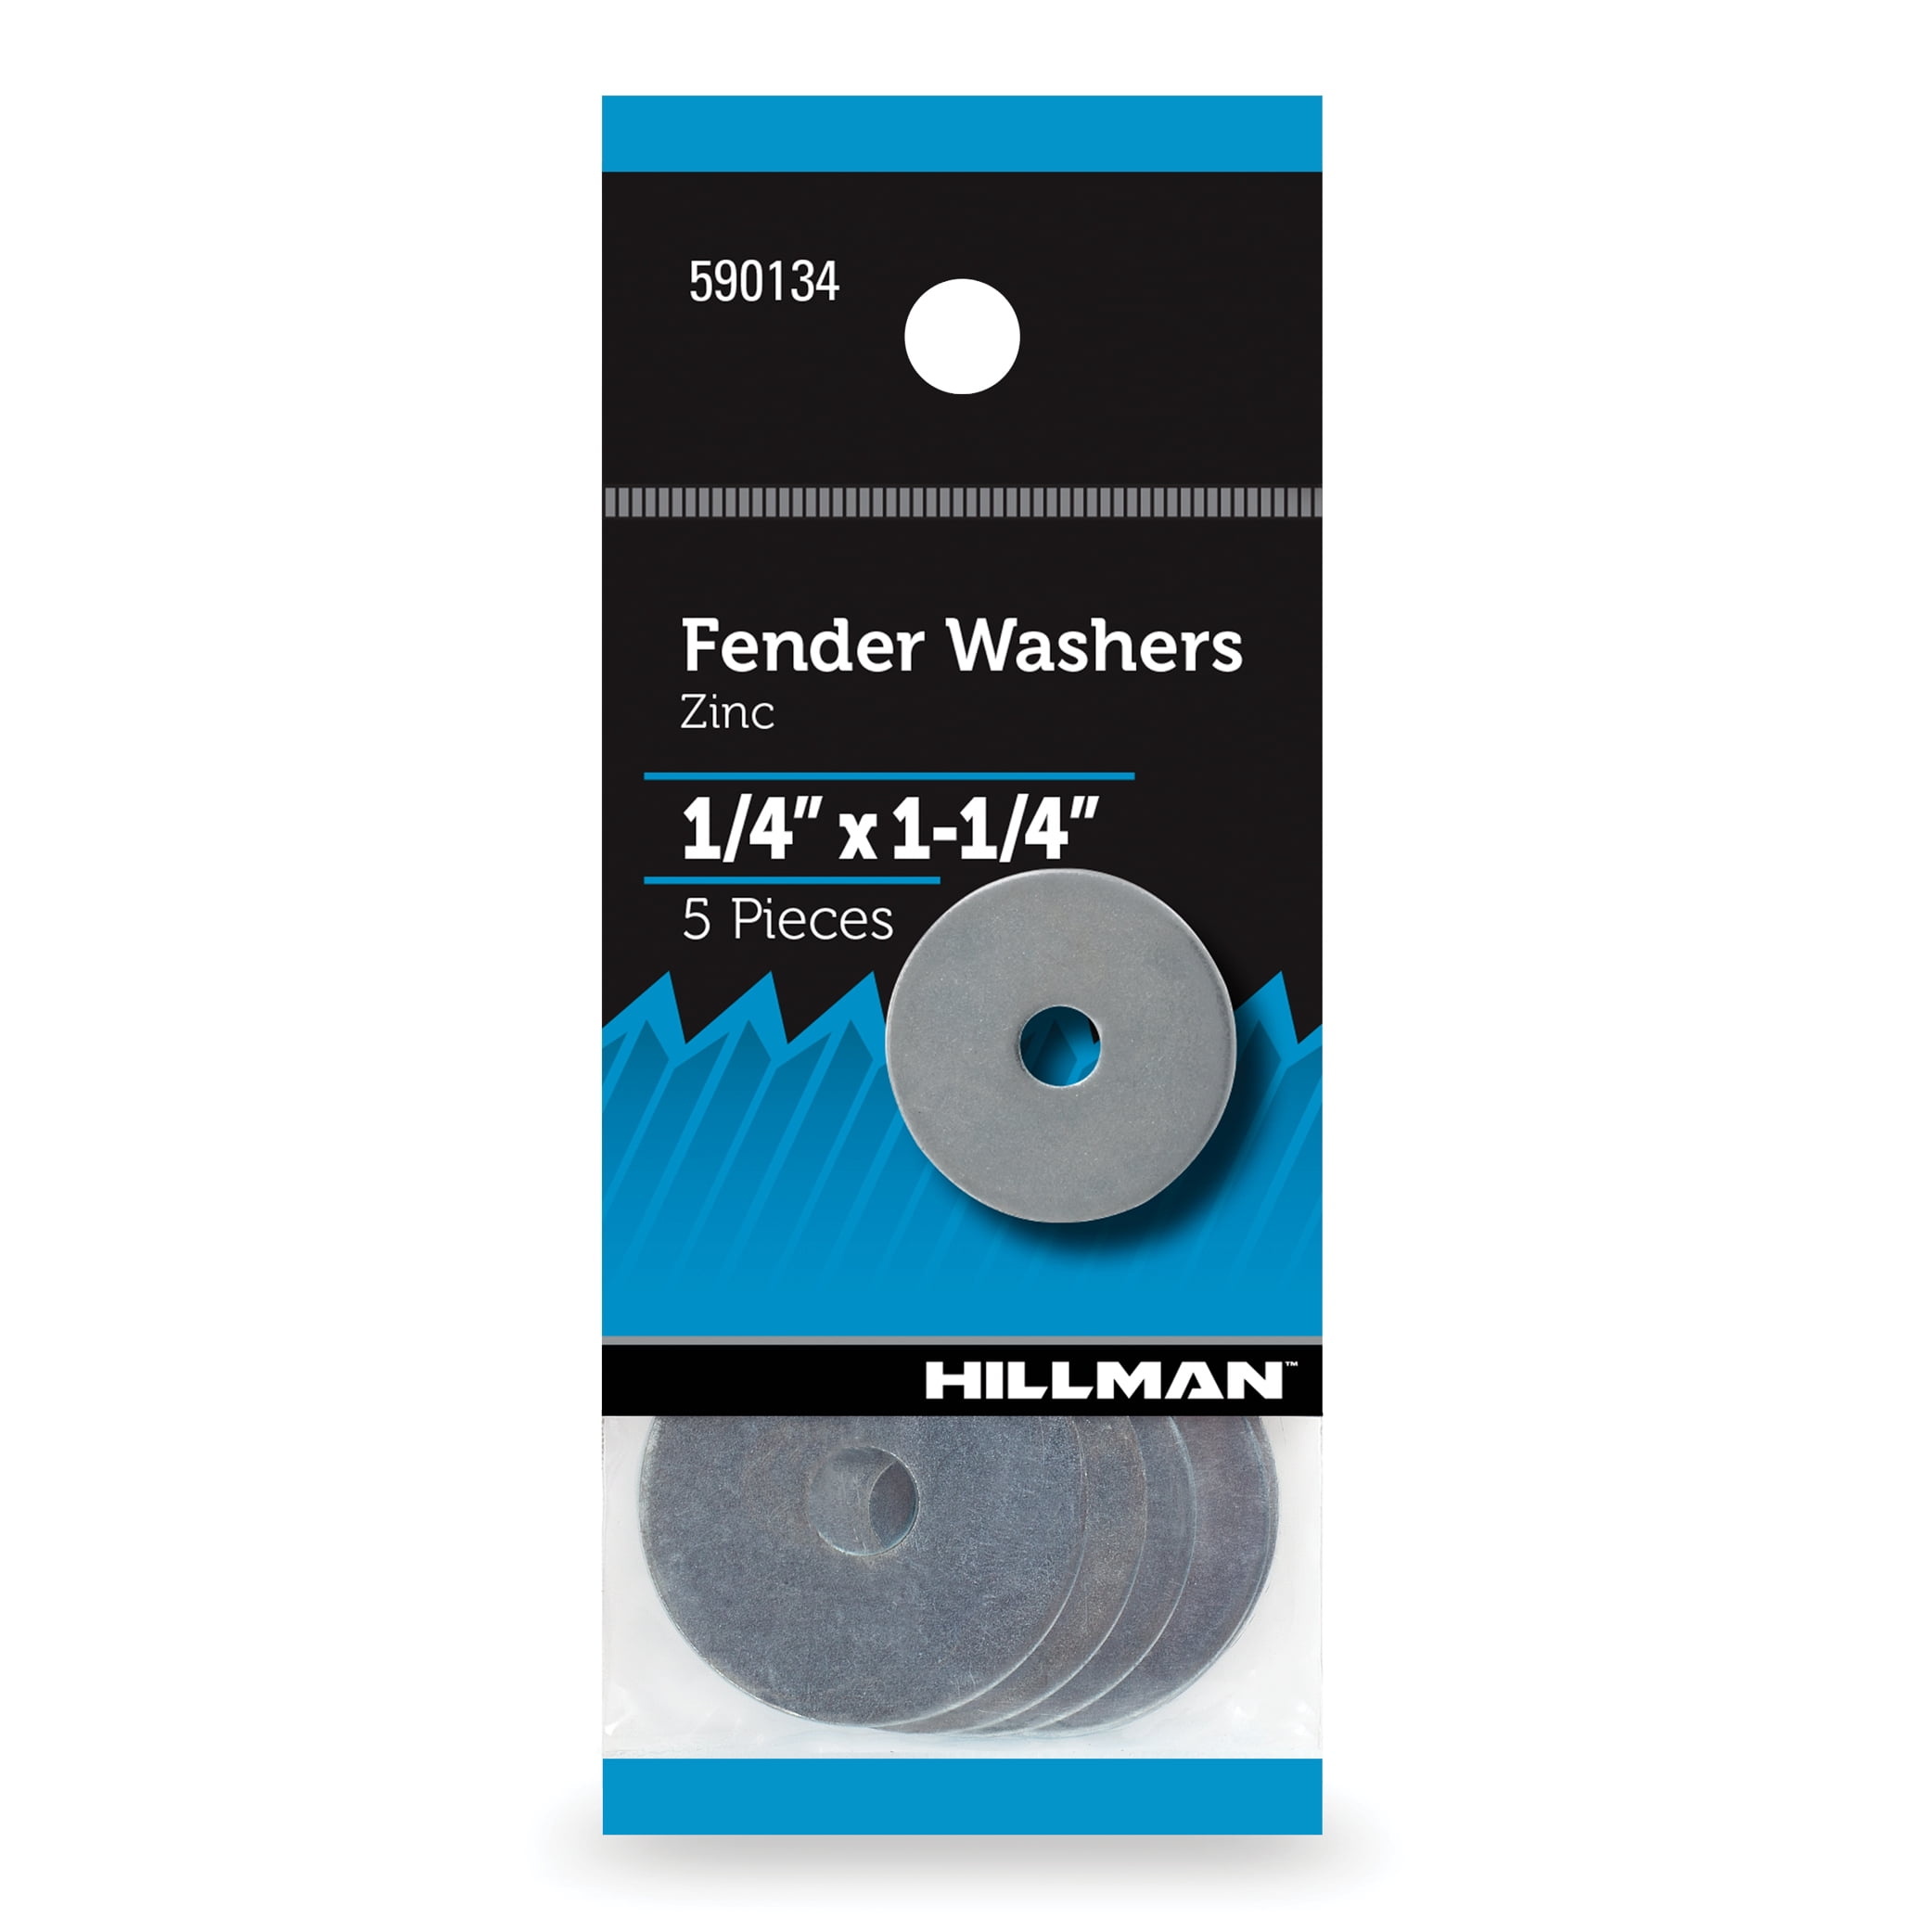 Hillman Fender Washers, 1/4" x 1.25", Zinc Plated, Steel, Pack of 5